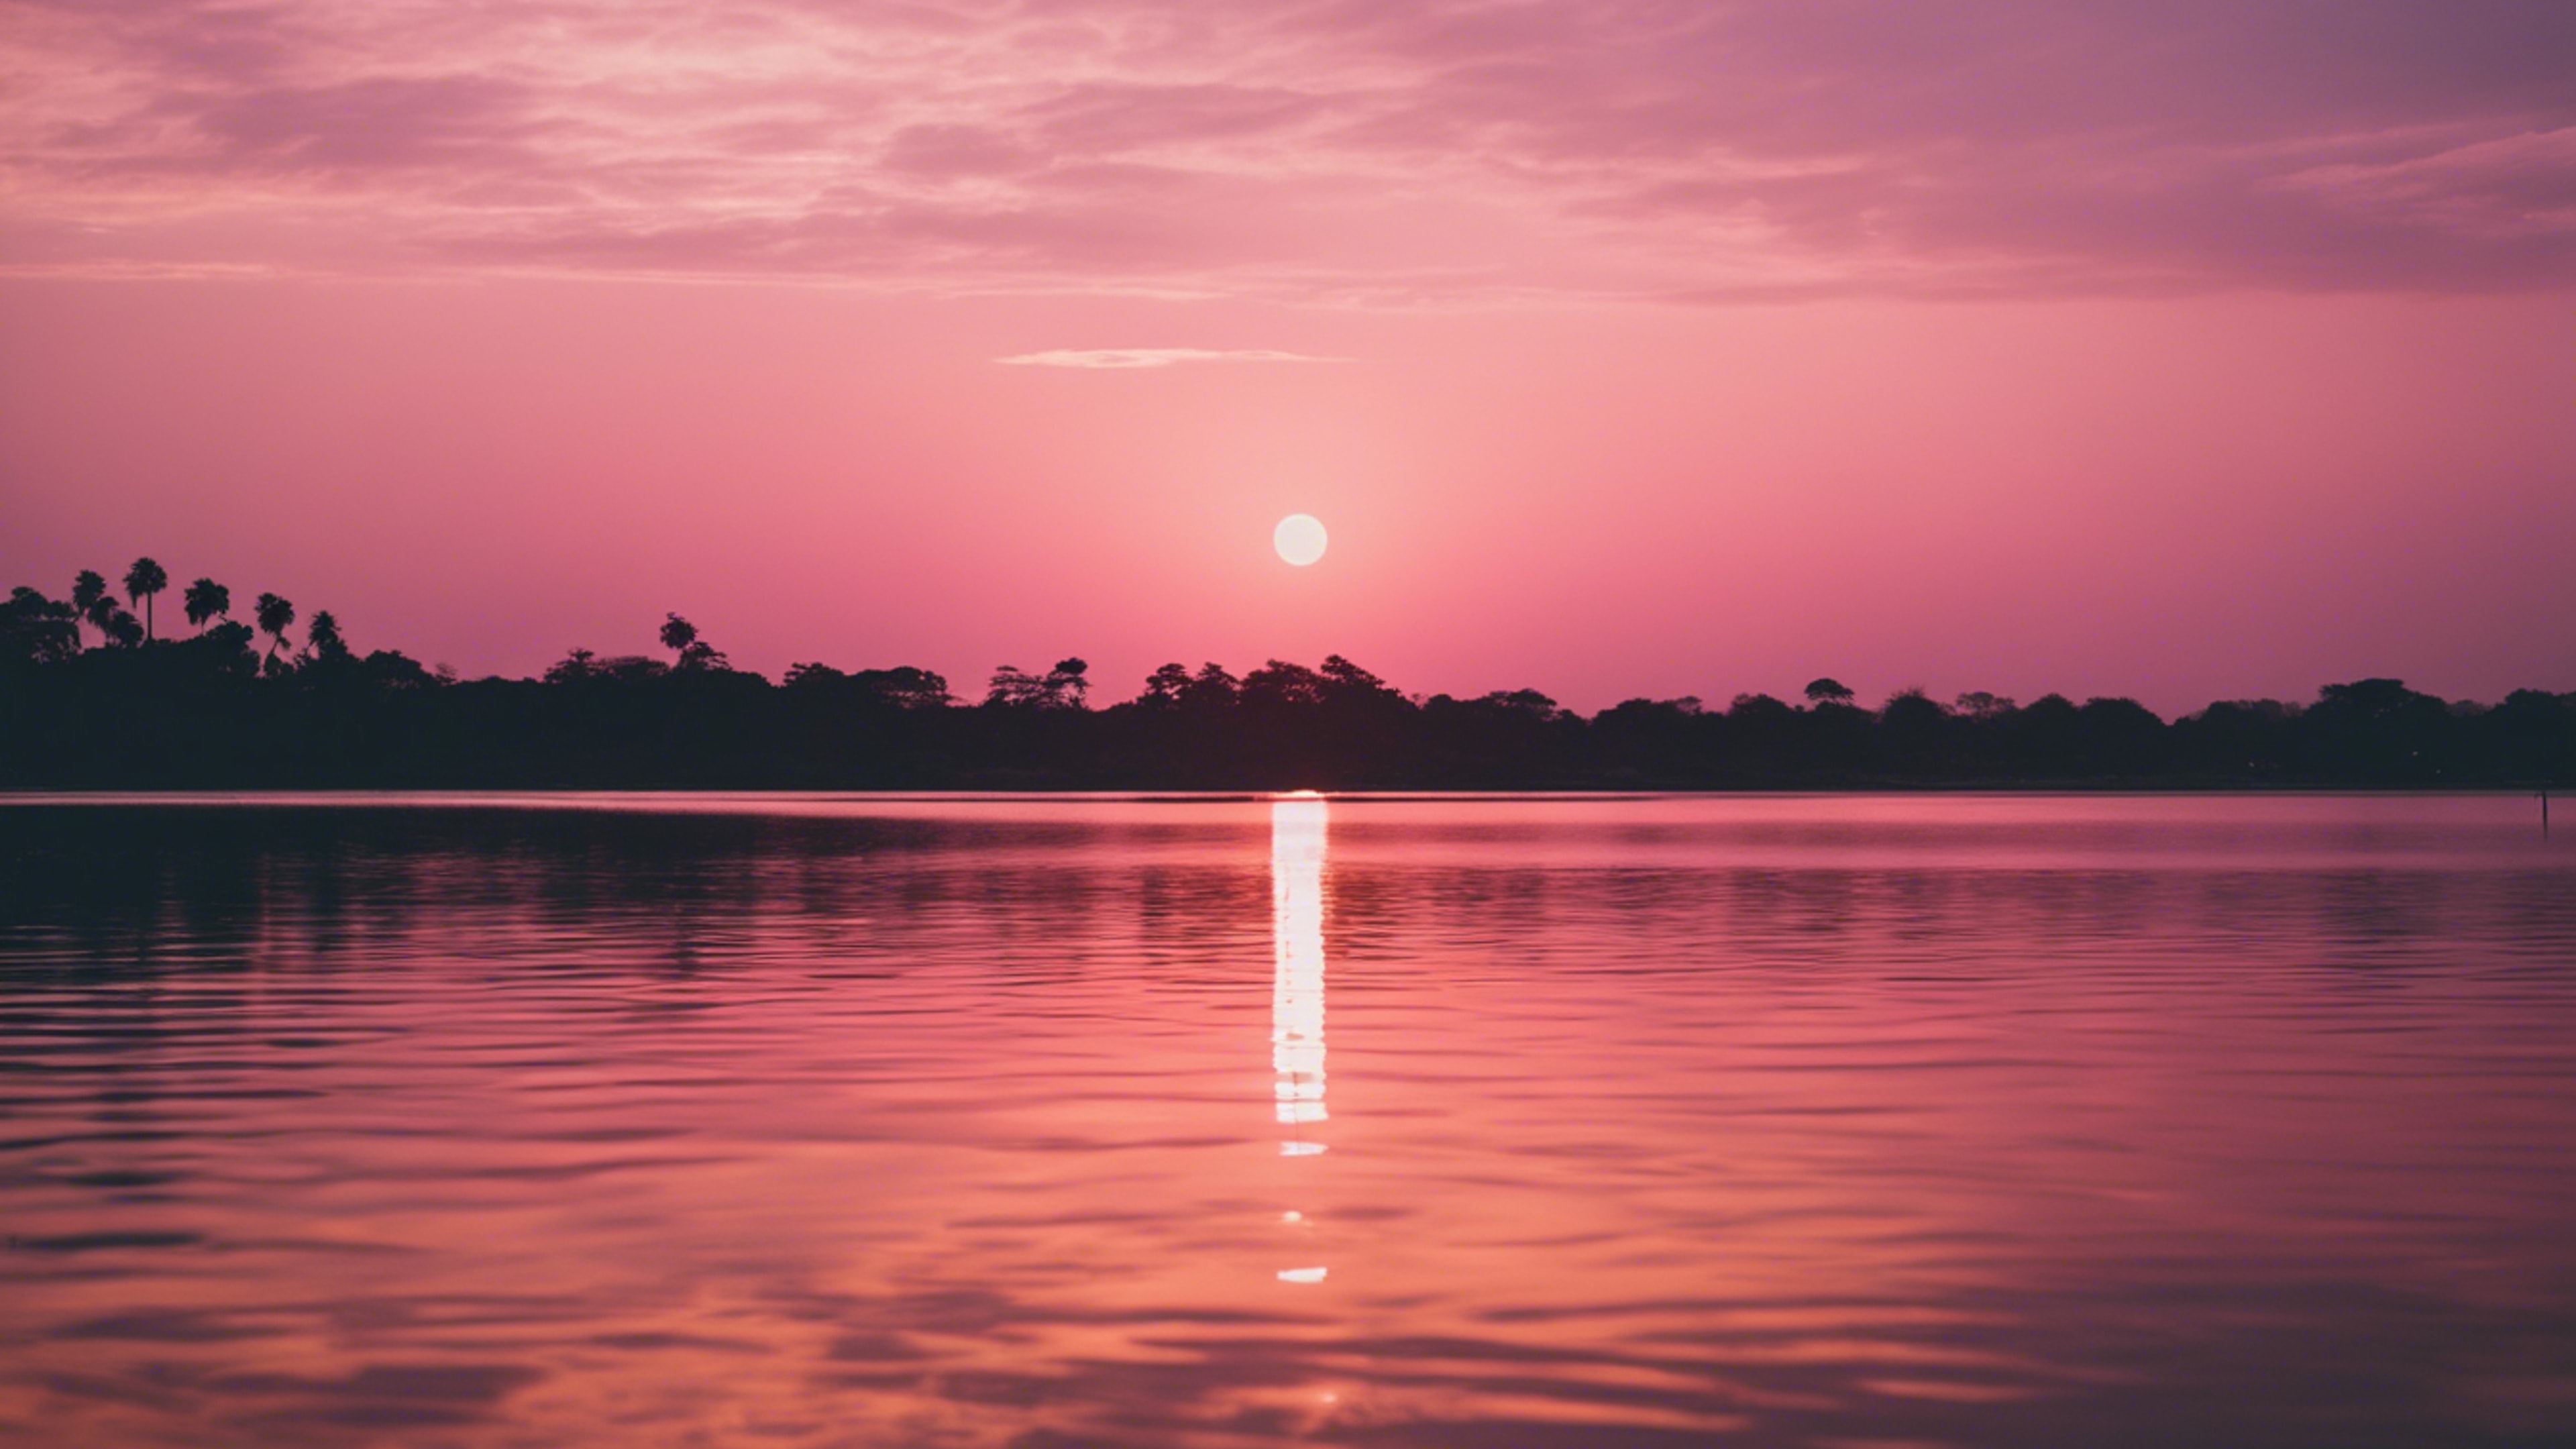 A picturesque pink and gold sunset reflecting on tranquil lagoon waters. Tapet[938883e46b5847a4931b]